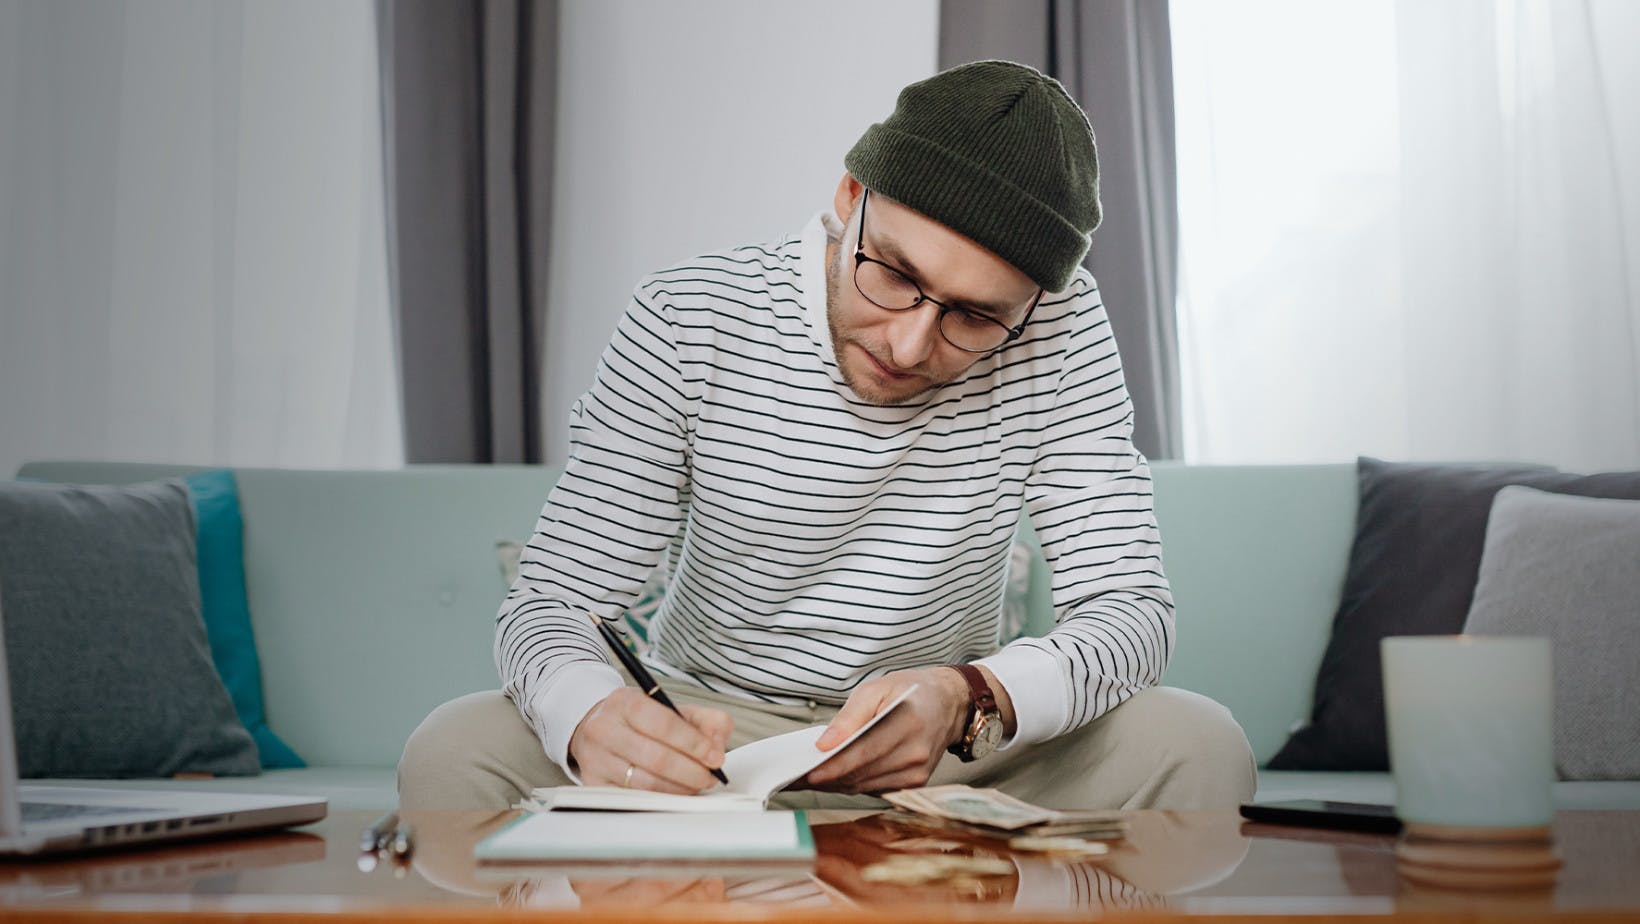 Male student with glasses on sitting and filling out application for a private student loan